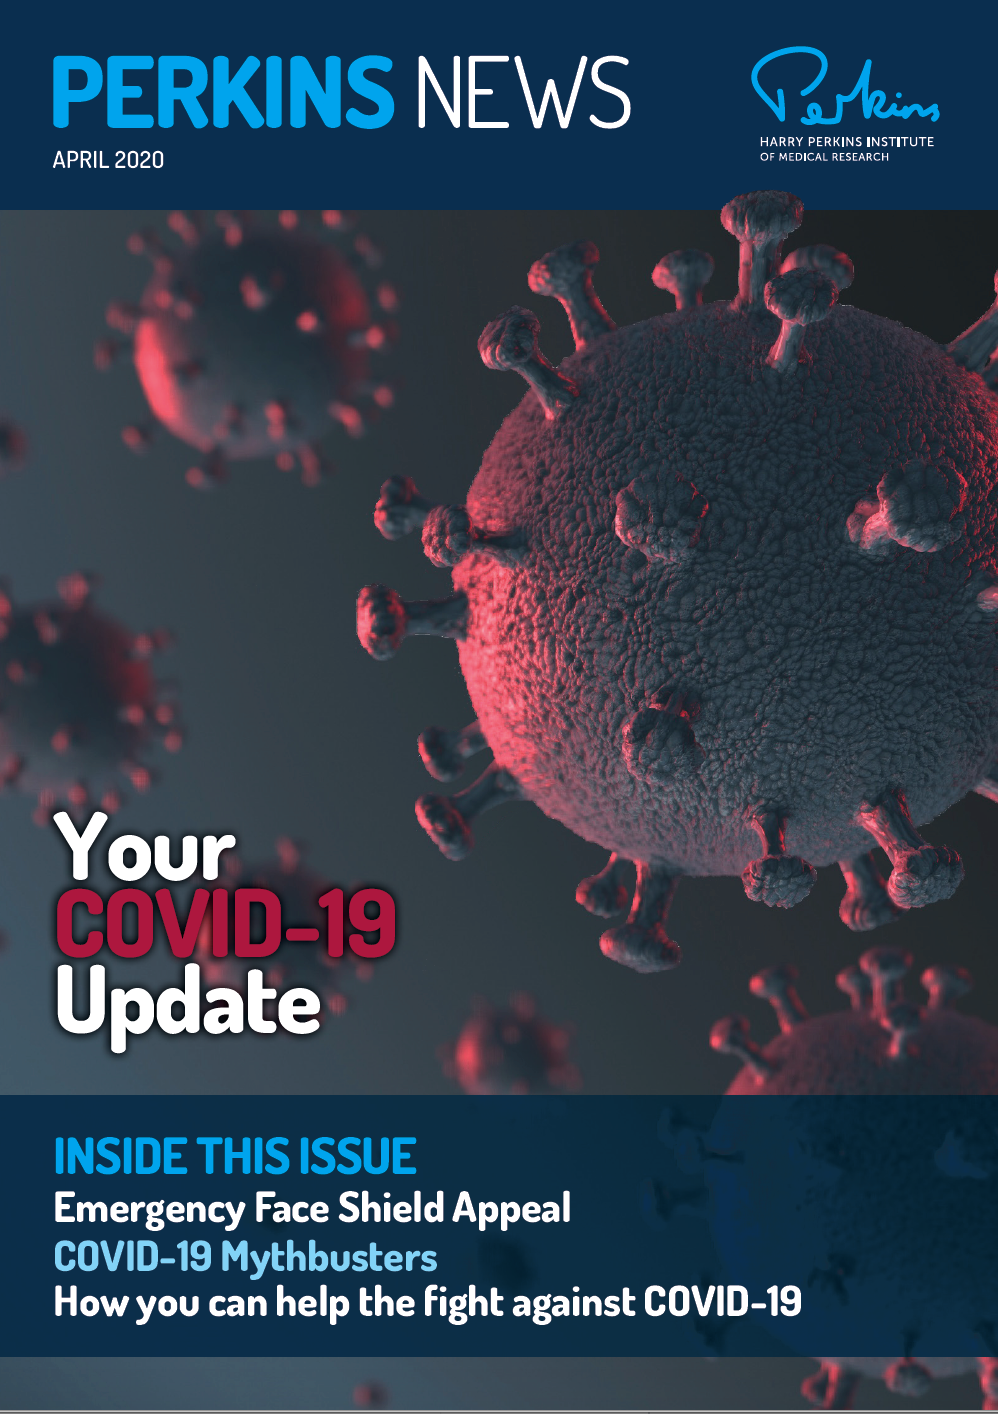 A magazine cover for Perkins news with the title "Your COVID-19 Update" showing COVID-19 molecular structure.